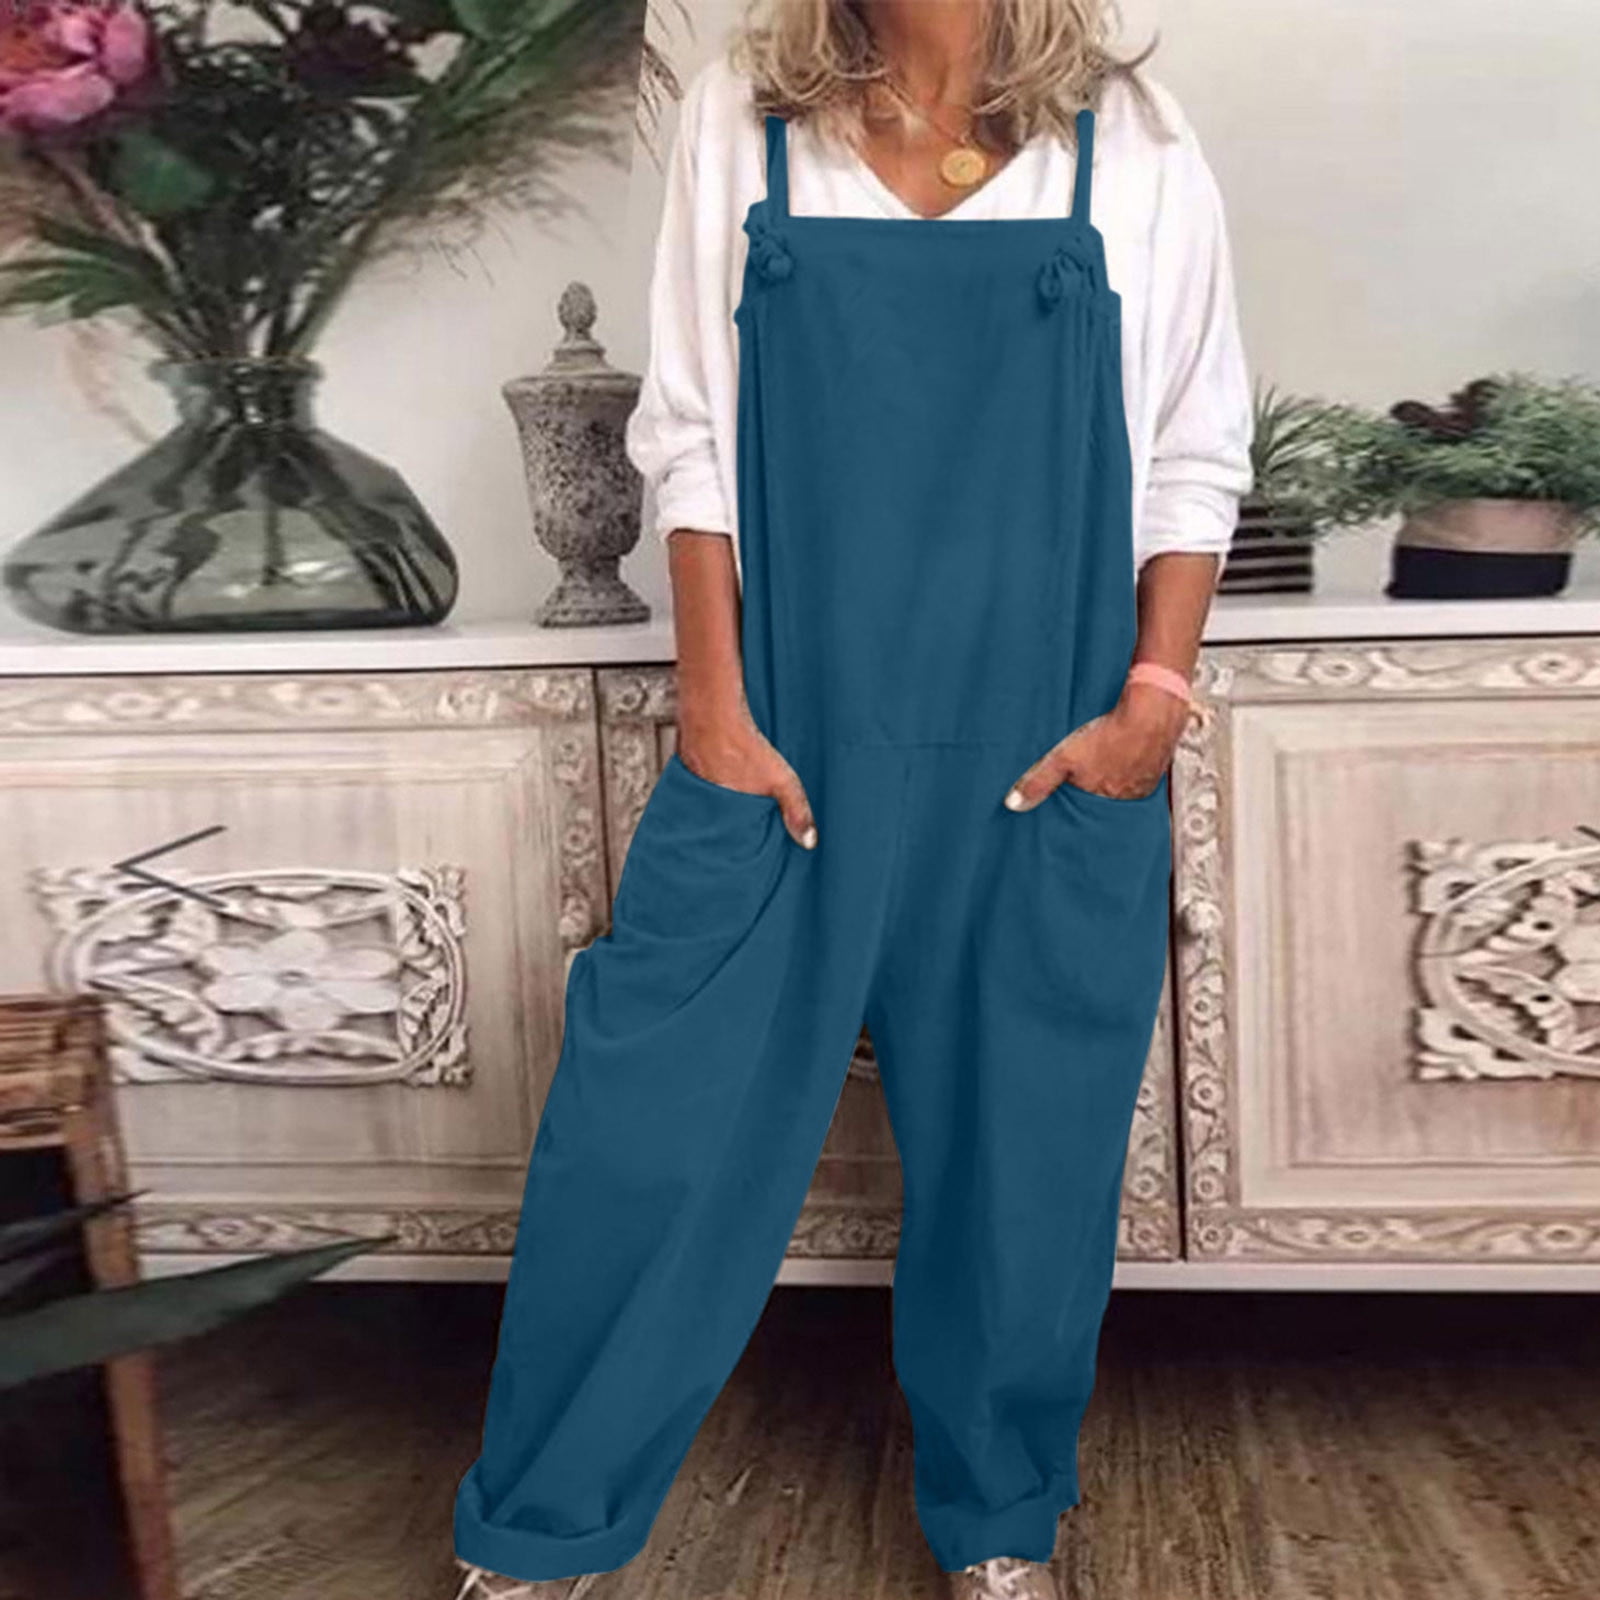 Pants for Women,Clearance Women's Plus Size Womens Overalls Casual ...